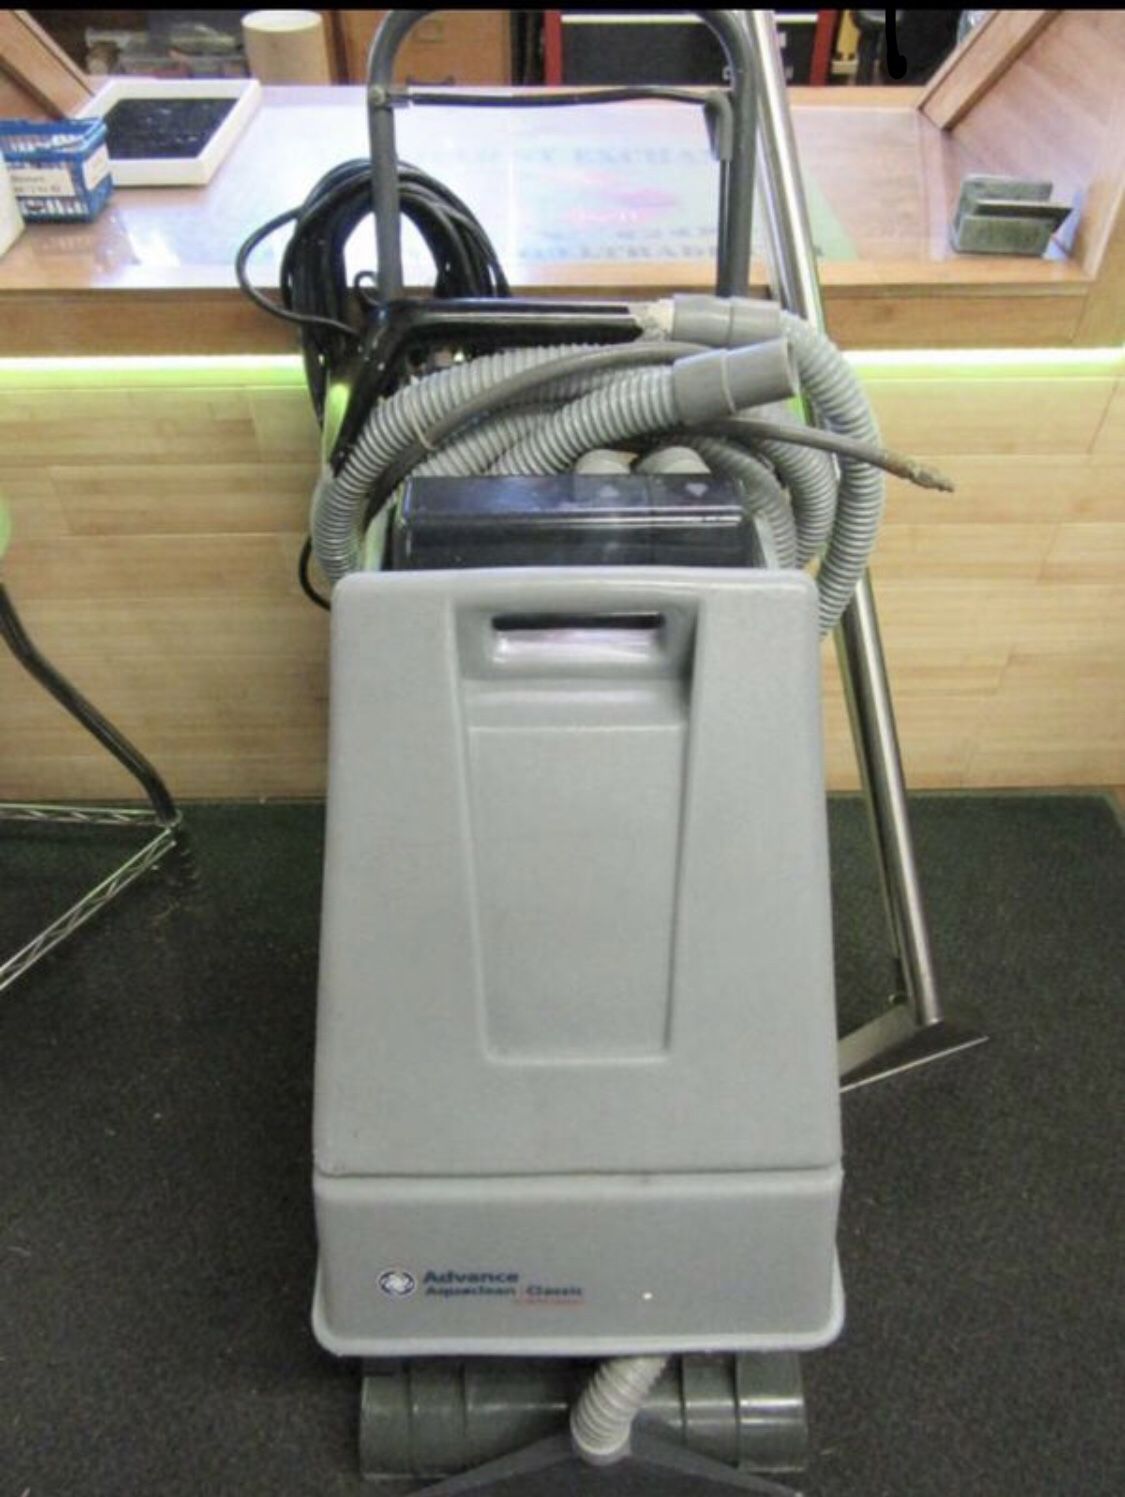 Reconditioned Advance Aquaclean Classic Carpet Cleaner